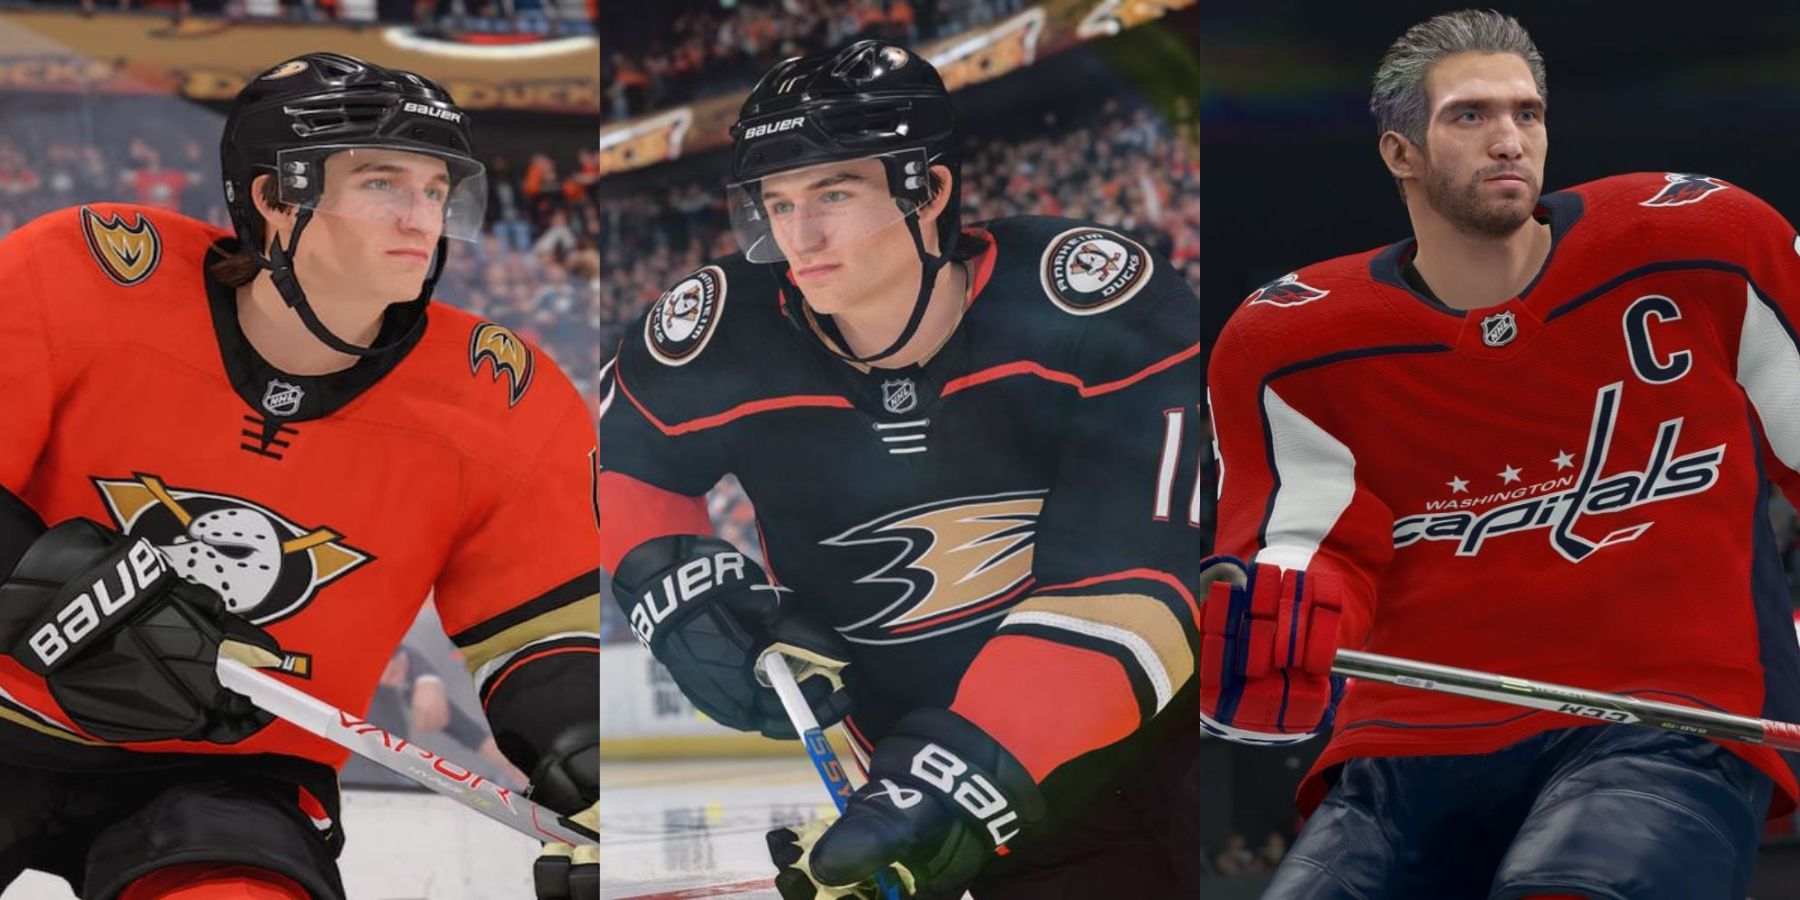 Who is the worst team in the NHL going into the 2022/23 season? 